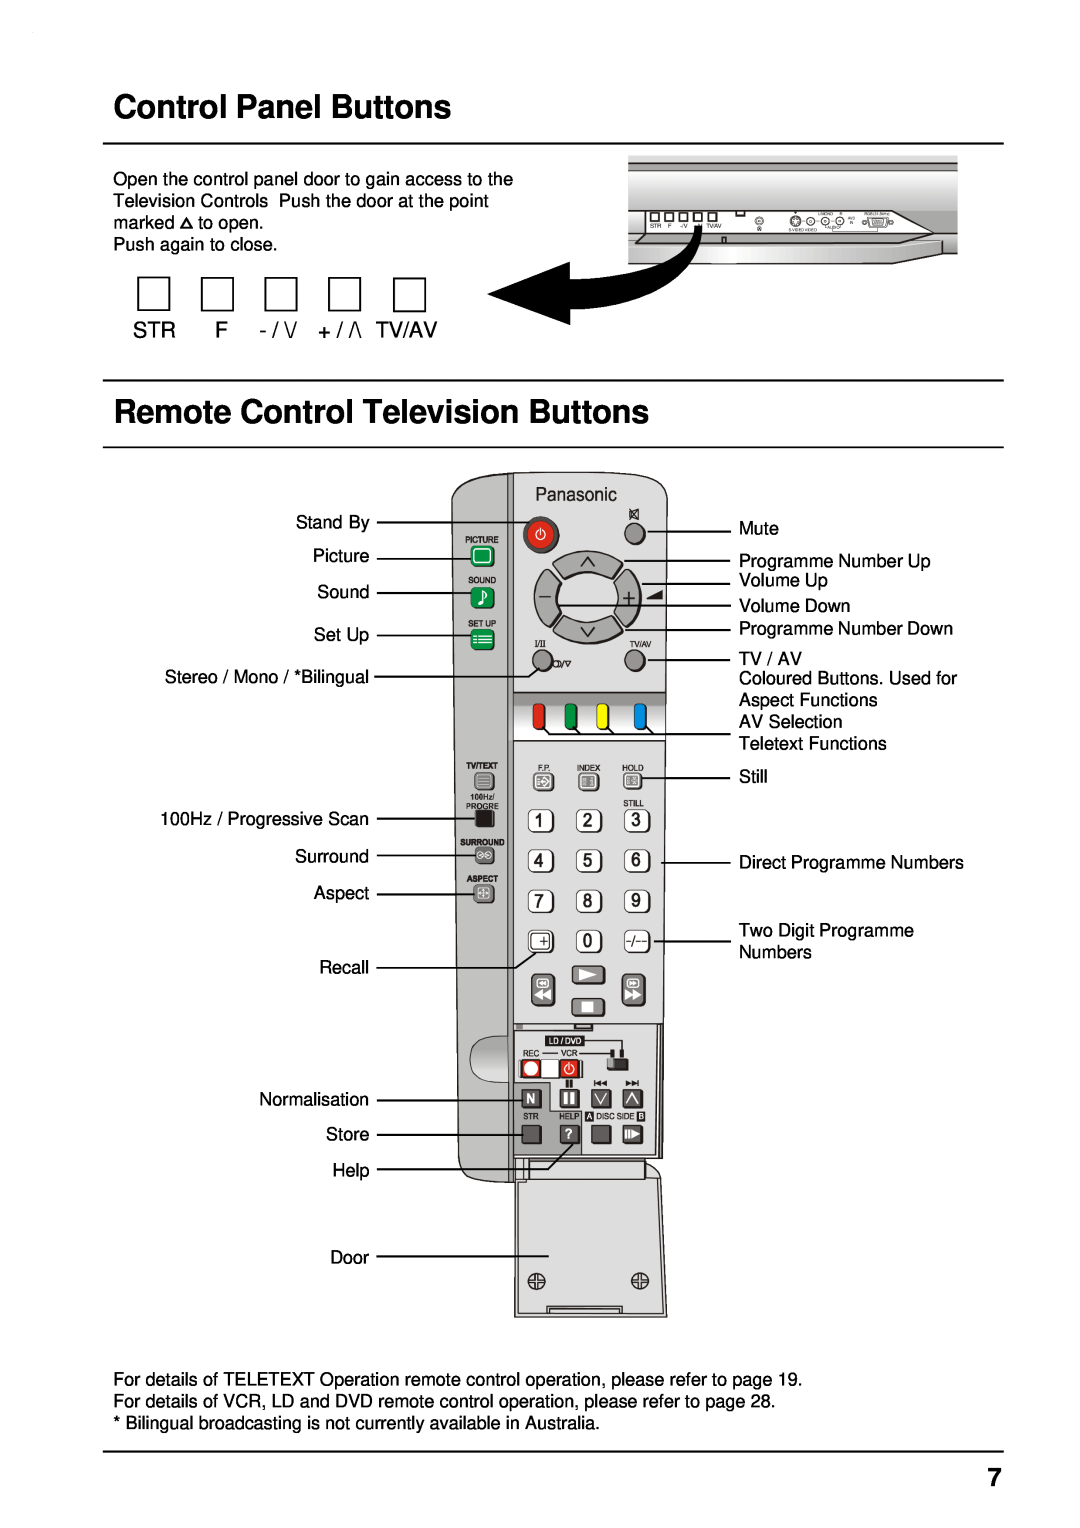 Panasonic TX-68P200A manual Control Panel Buttons, Remote Control Television Buttons, Str F - / \/ + / /\ Tv/Av 